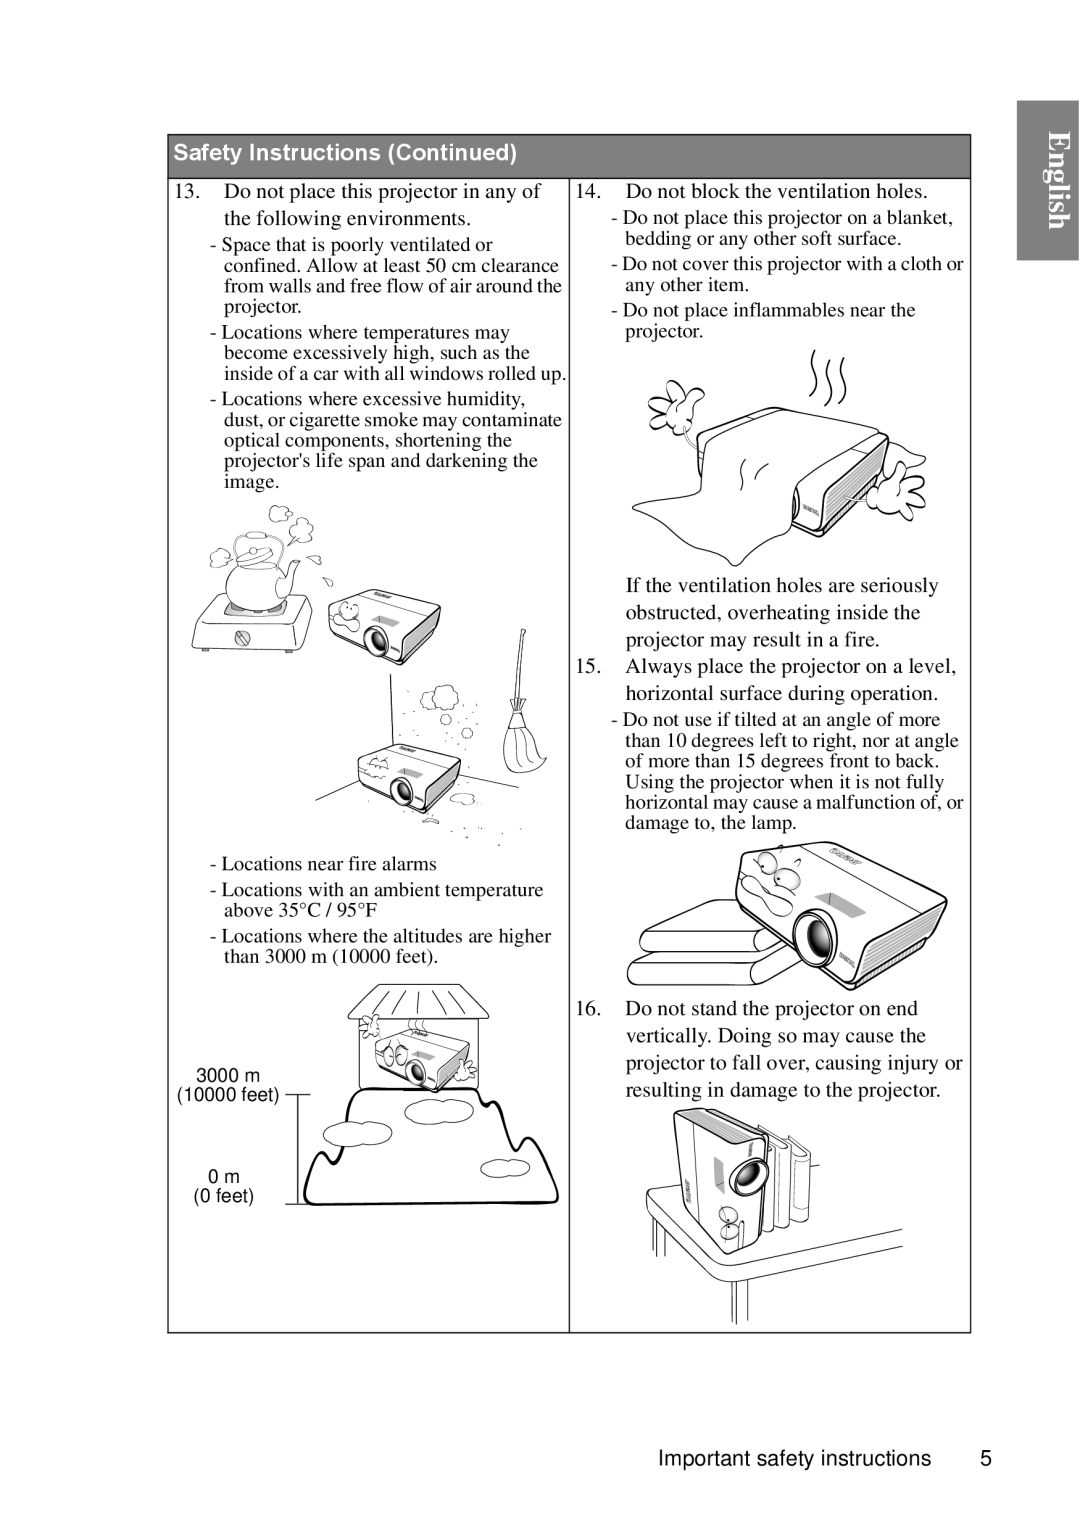 BenQ MP670 English, Safety Instructions Continued, Do not place this projector in any of the following environments 